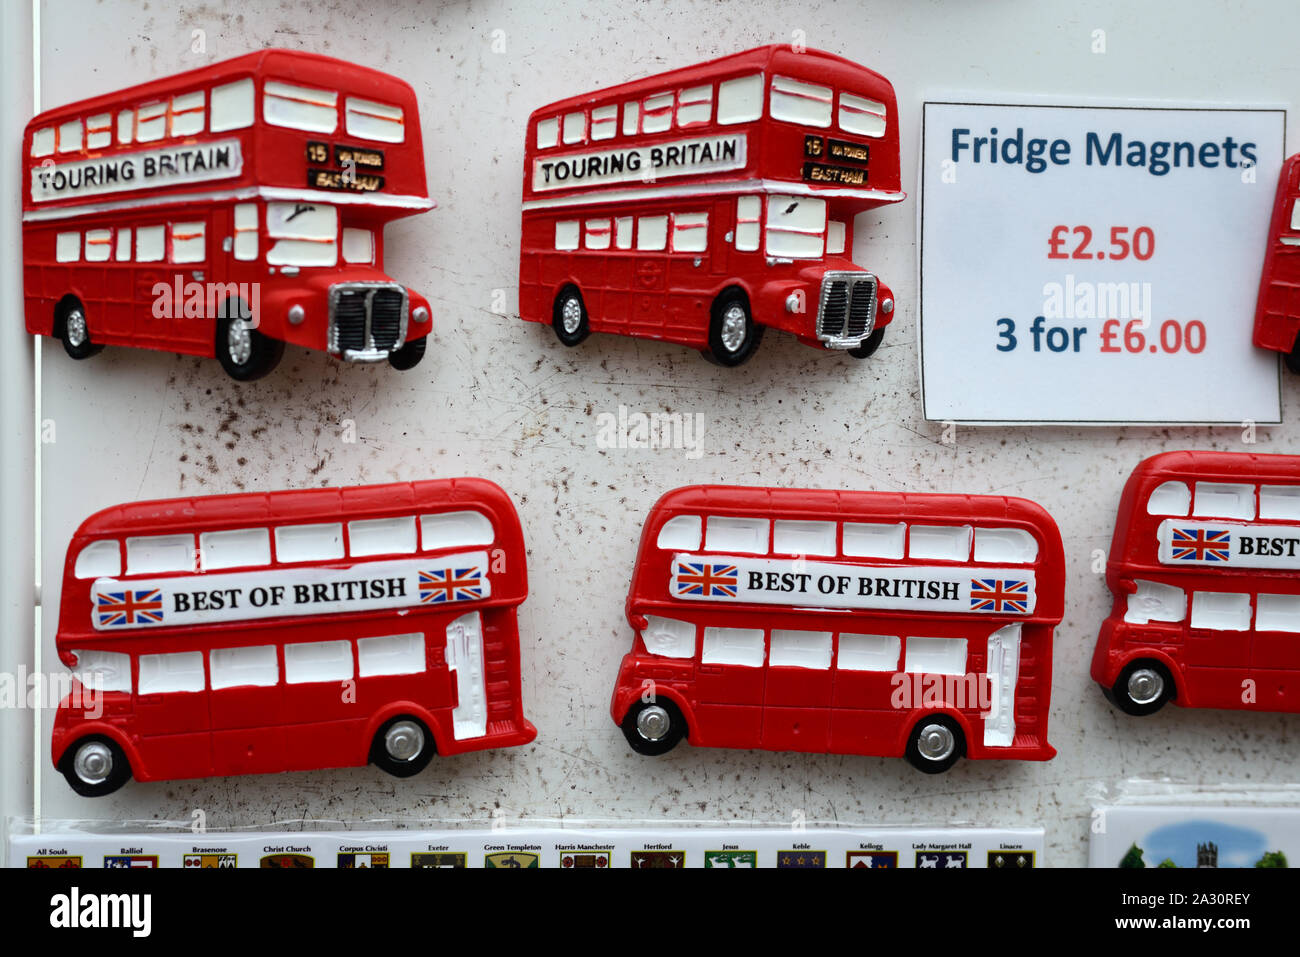 Iconic Red Double-Decker London Buses. Souvenir Badges or Fridge Magnets For Sale on Souvenir Stall London England UK Stock Photo